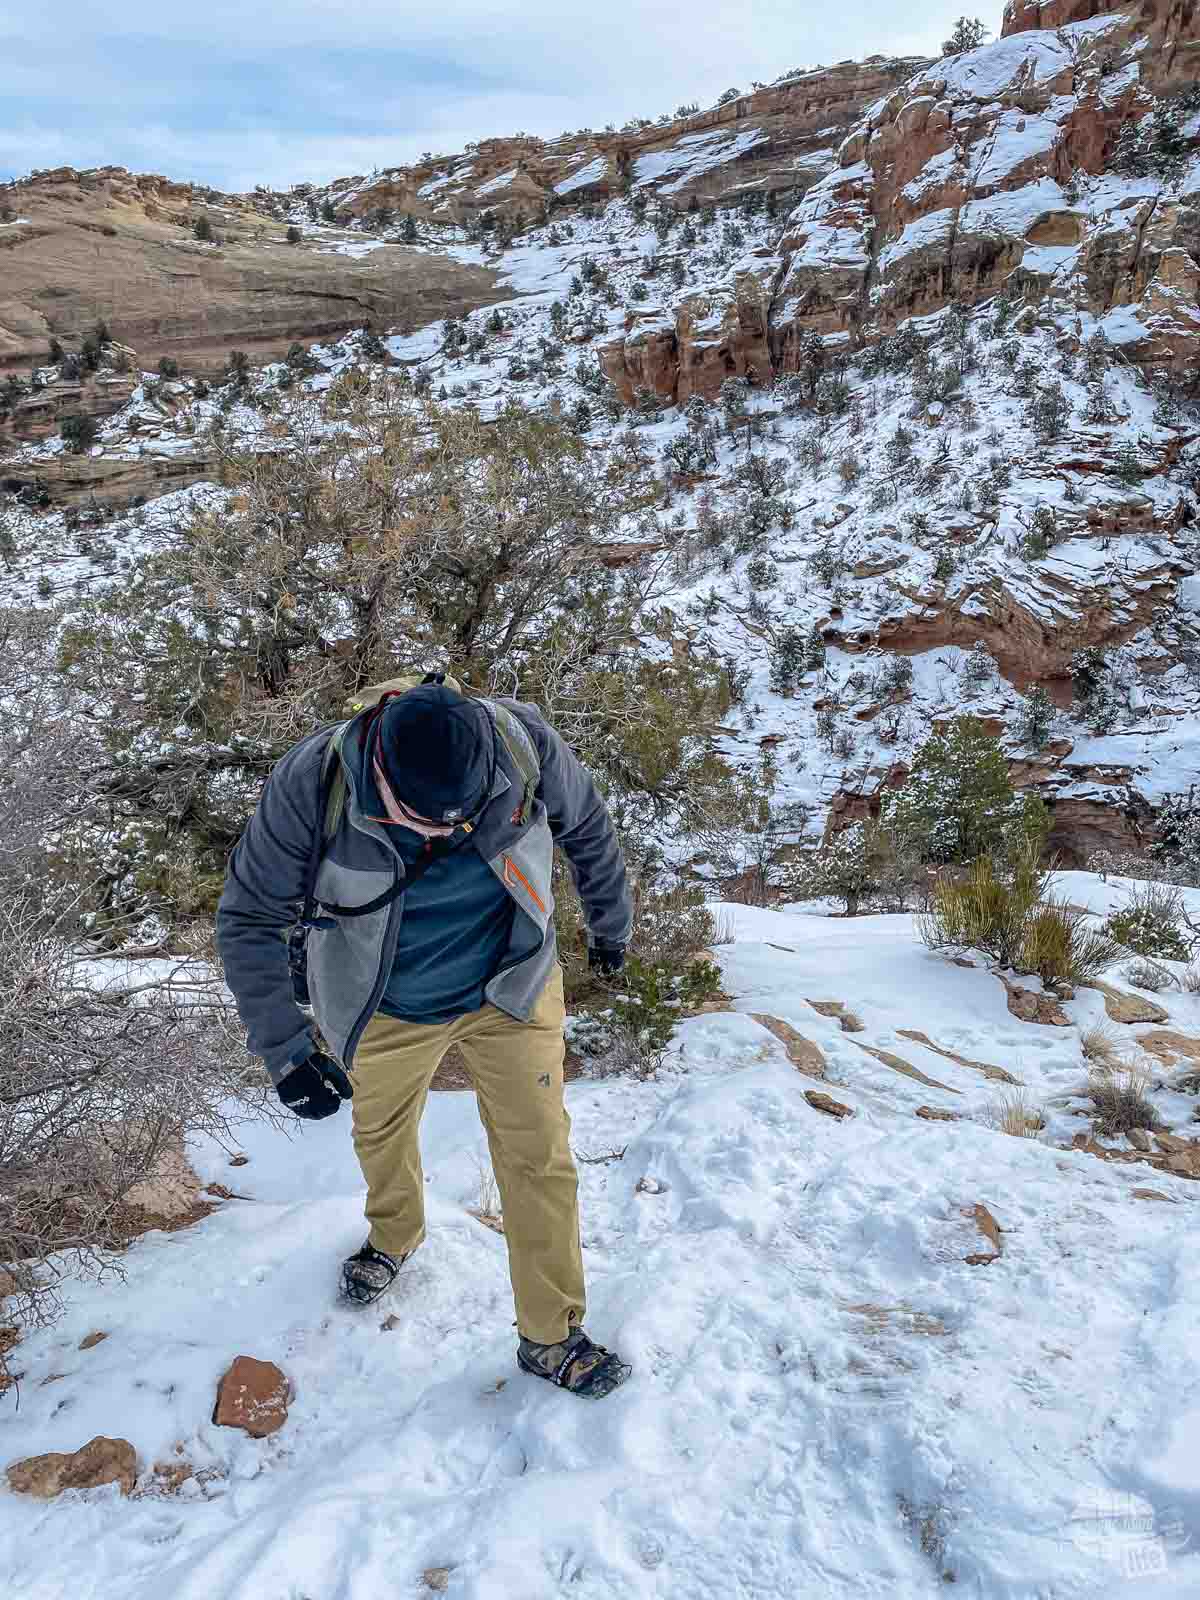 Hiking in Cold Weather - Tips, Tricks and Gear - Our Wander-Filled